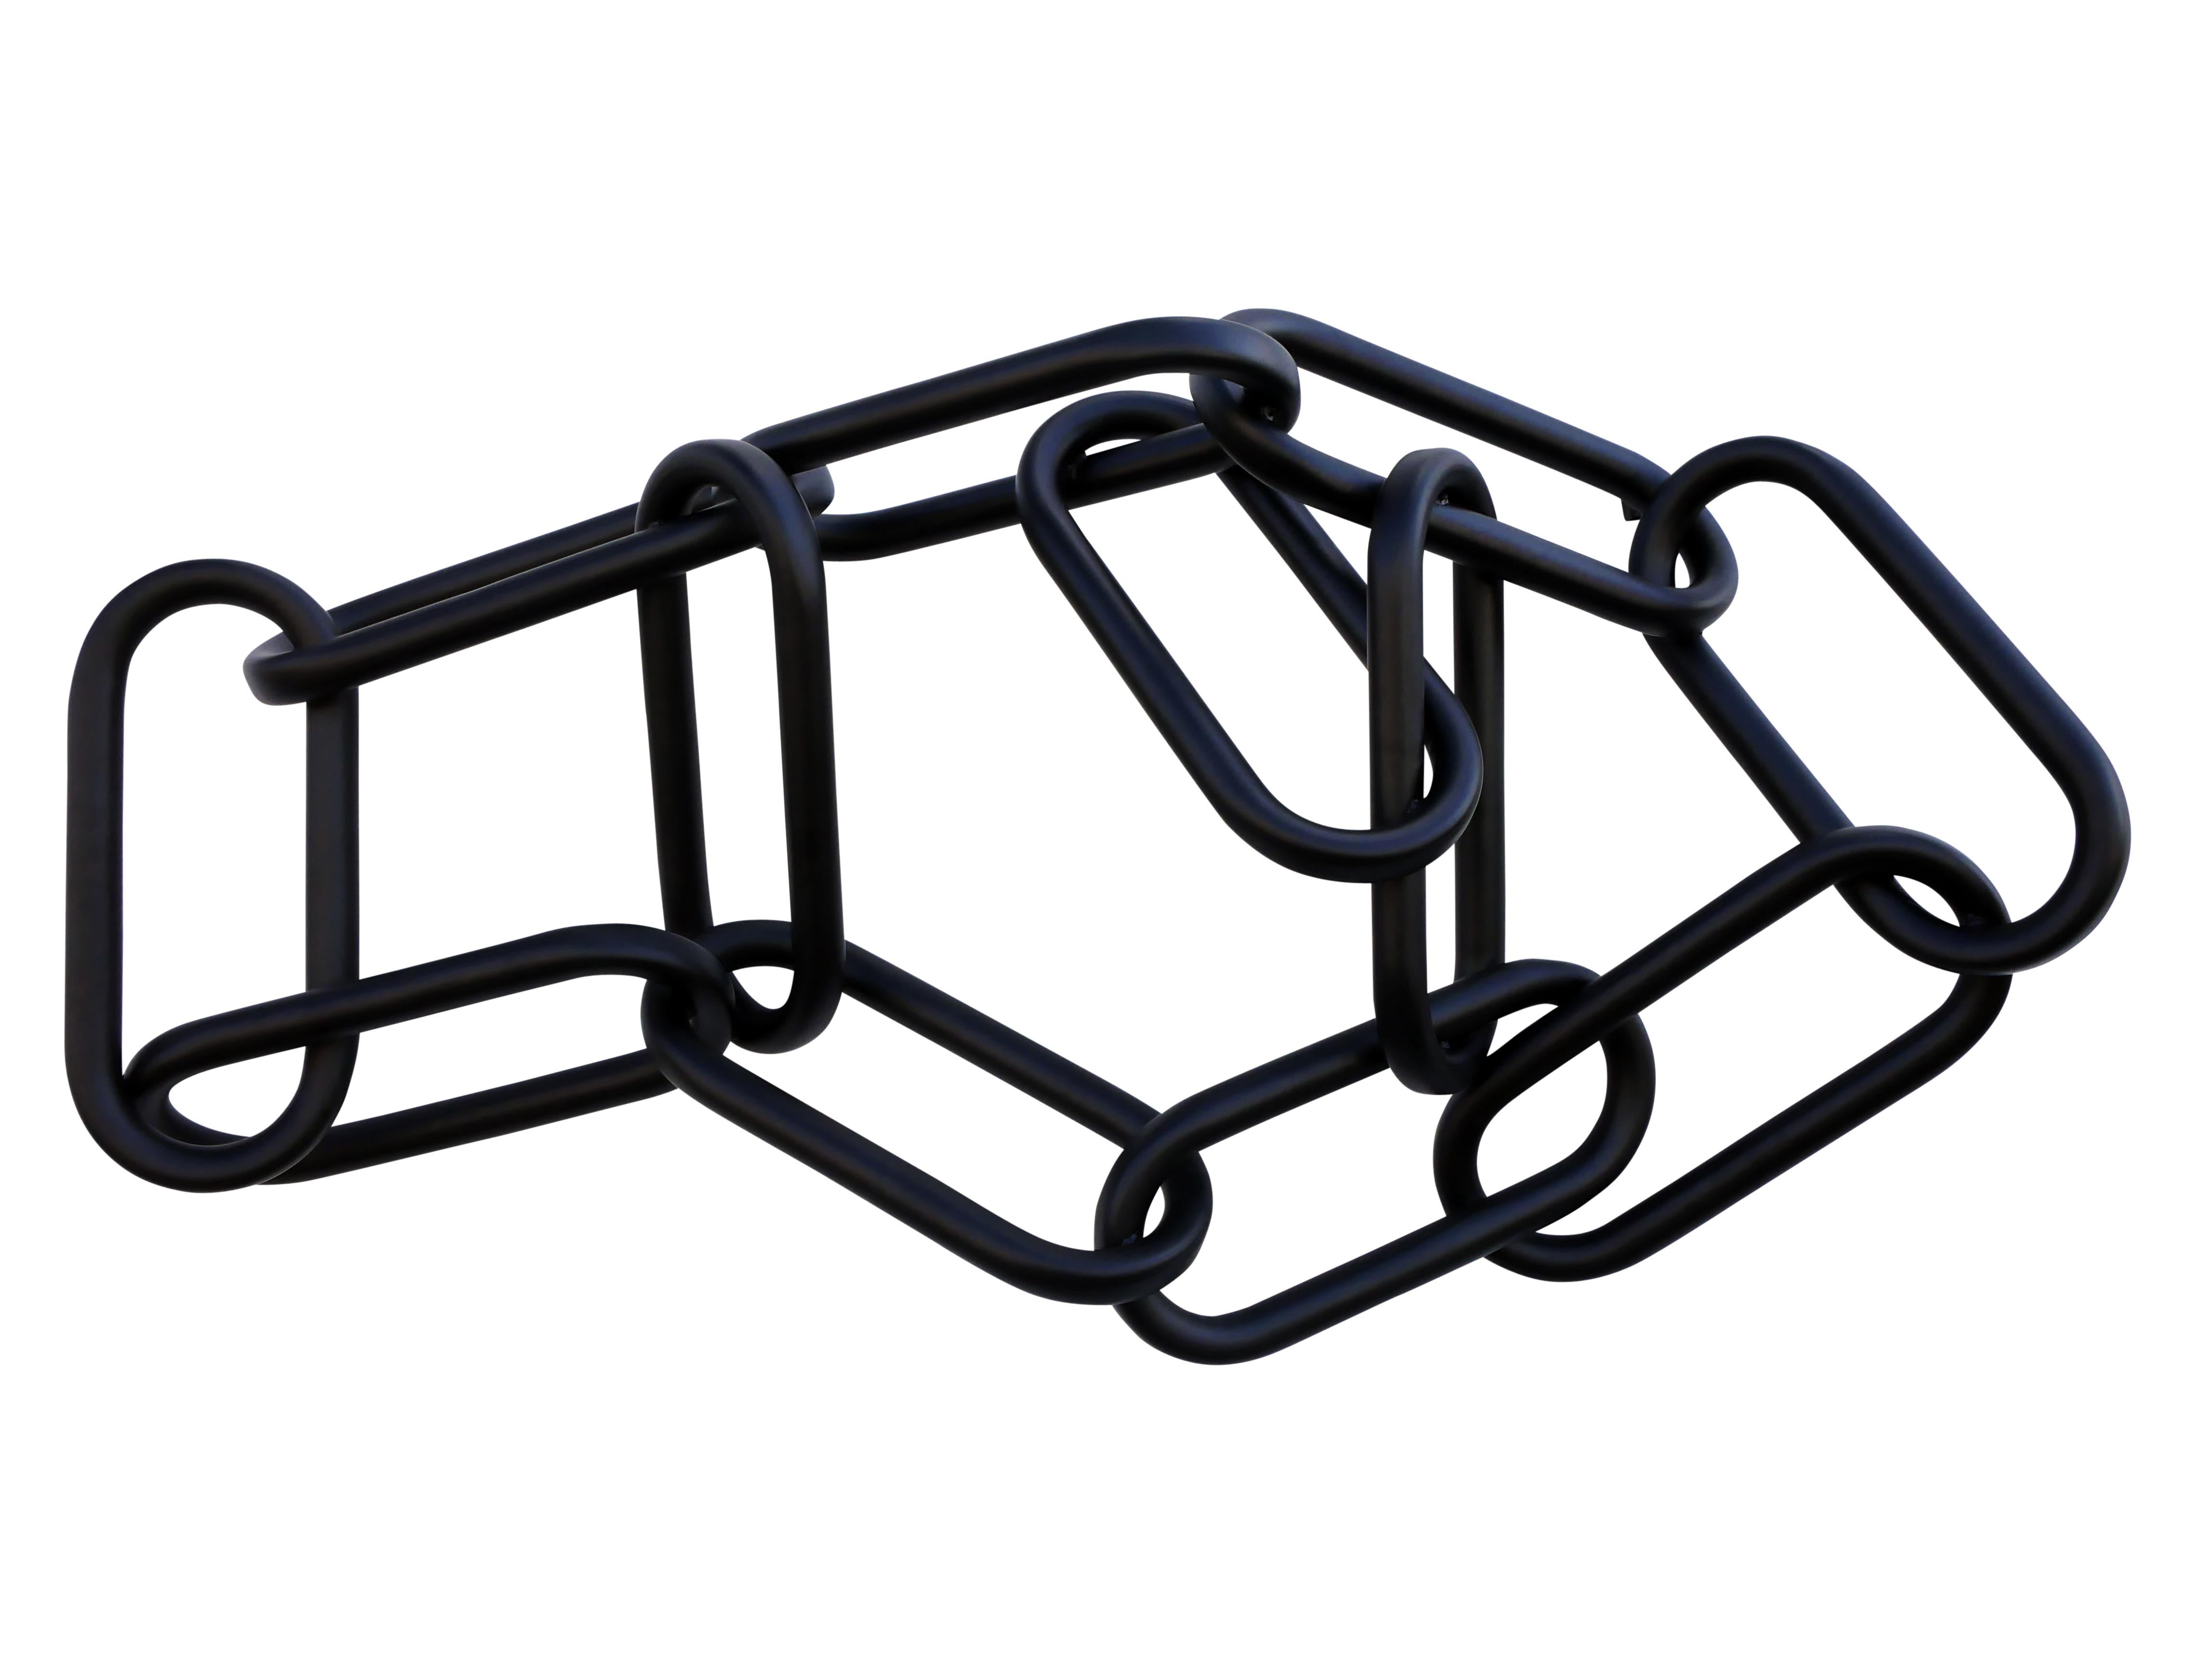 Matthew Reeves Abstract Sculpture - Large Abstract Contemporary Black Chain Wall Sculpture